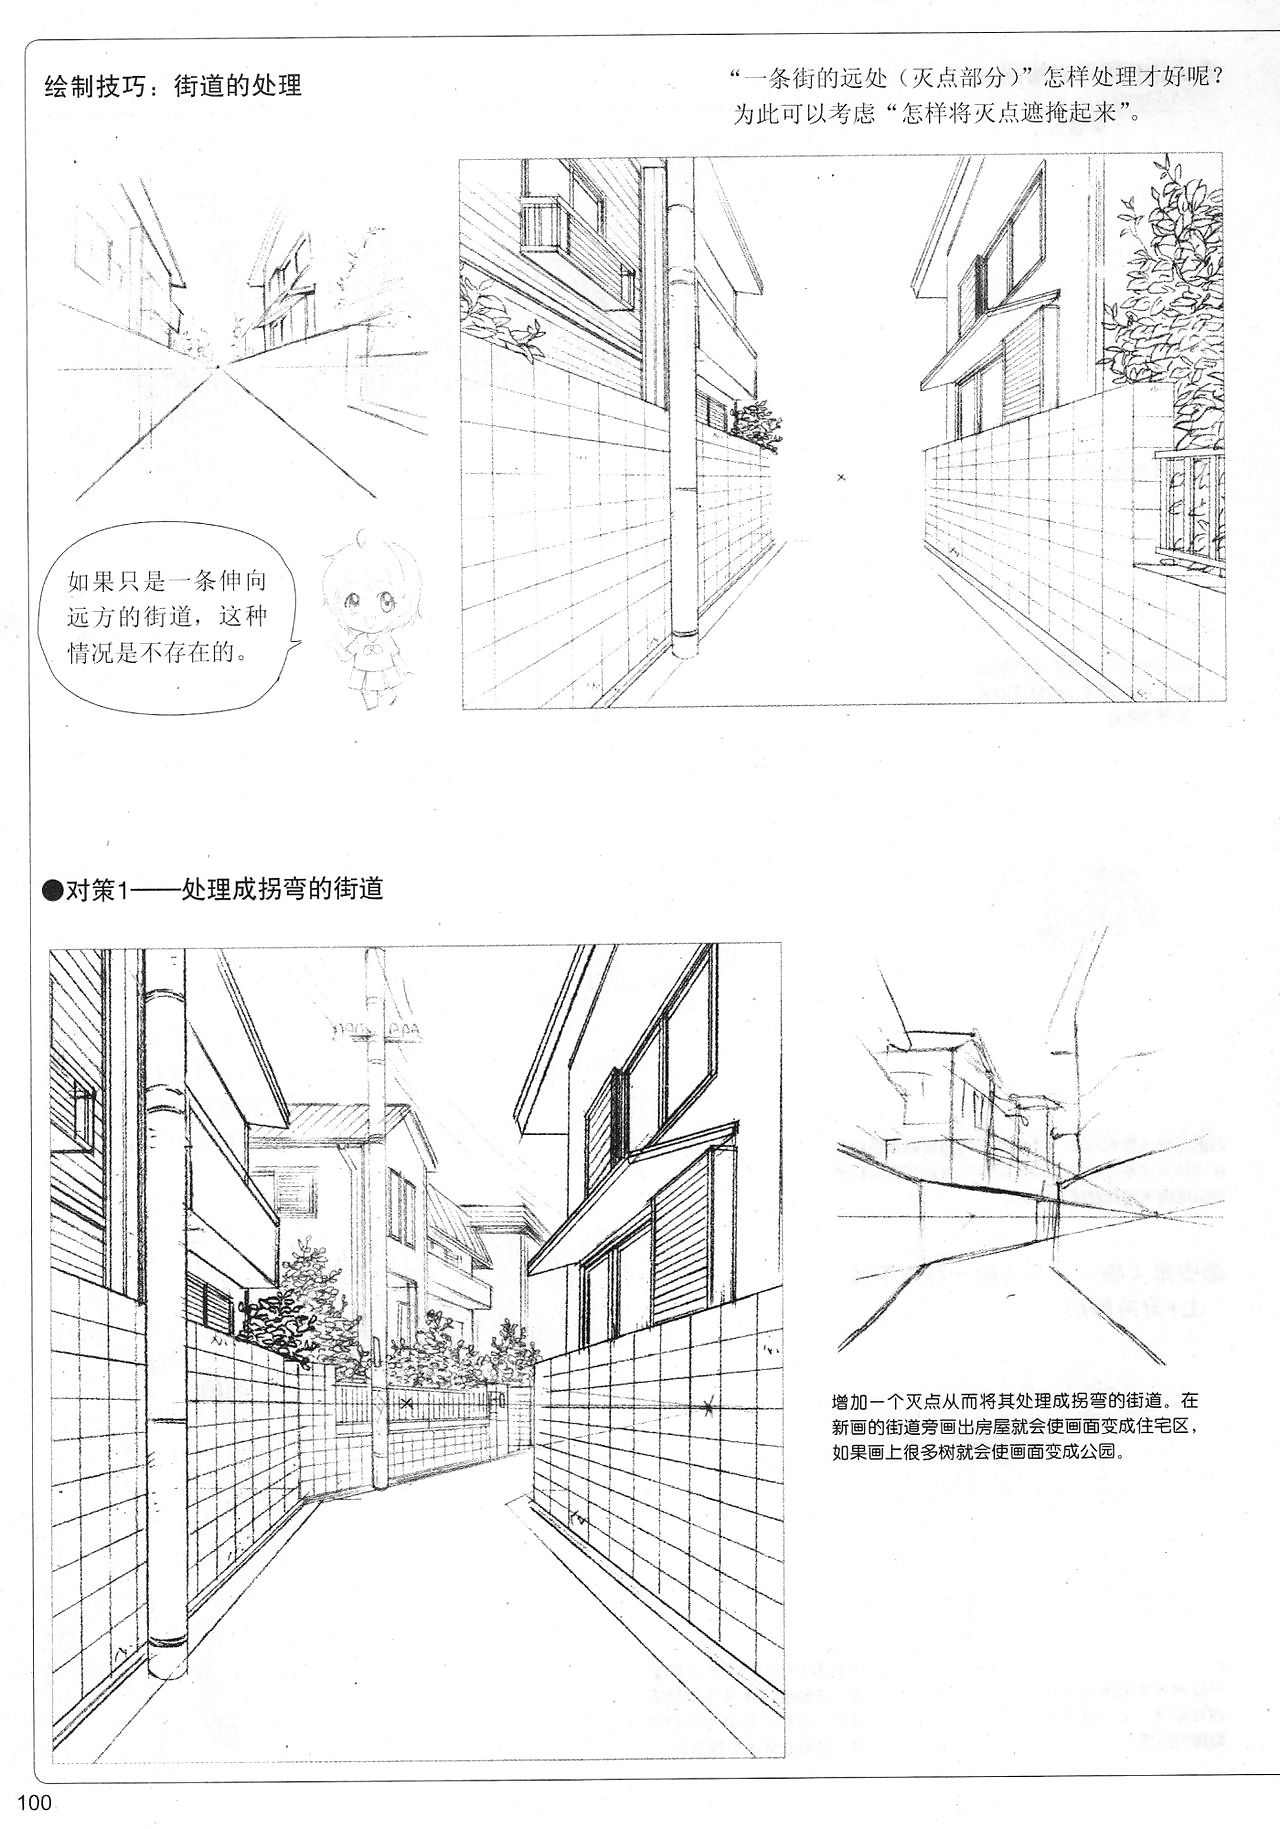 How to Draw Manga: Sketching Manga-Style Volume 4: All About Perspective - part 6